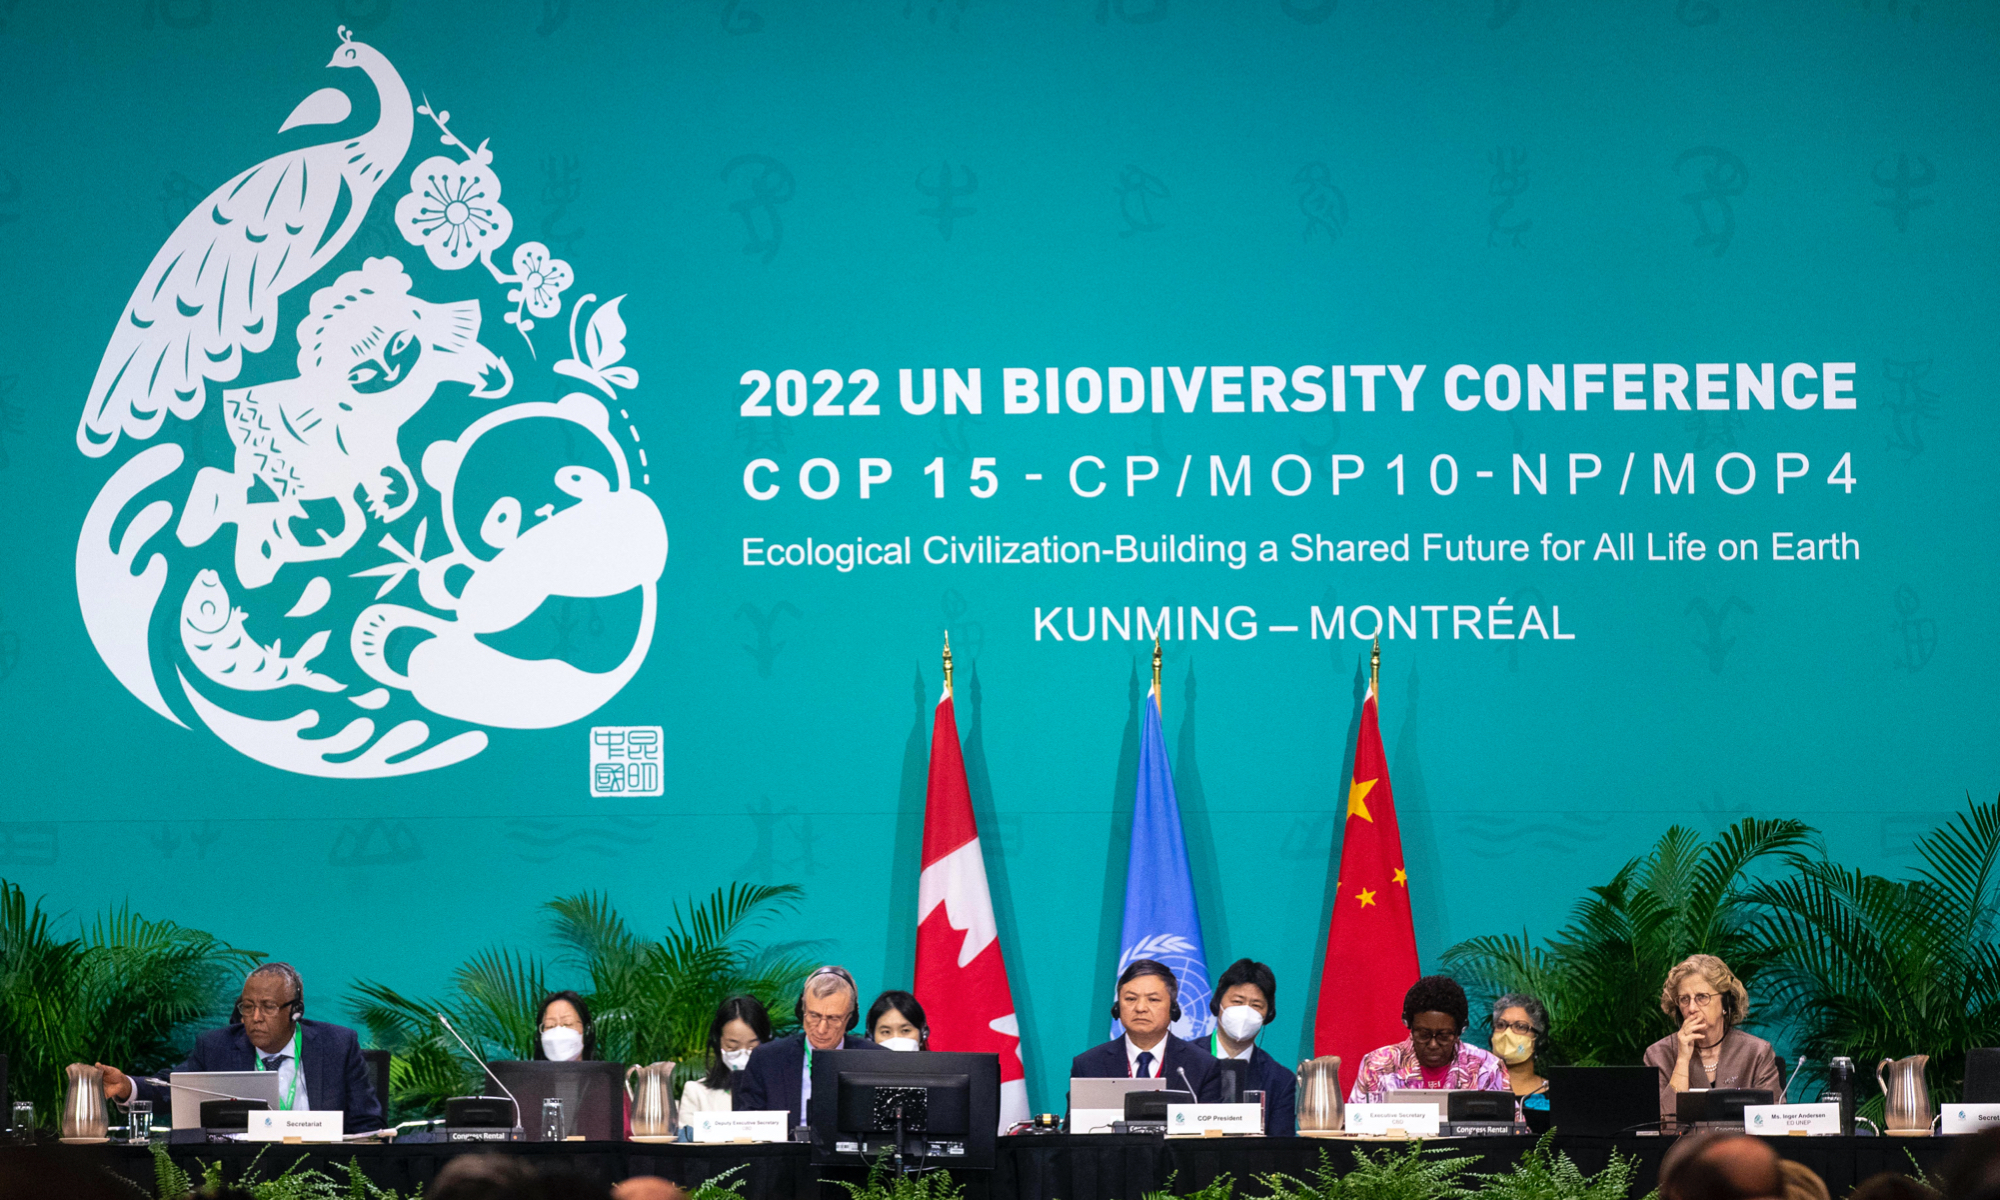 Chinese Minister of Ecology and Environment Huang Runqiu (centre-rignt), Secretariat of the Convention on Biological Diversity, David Ainsworth (centre-left), Executive Secretary of the UN Convention on Biological Diversity,  Elizabeth Maruma Mrema (2nd right) and Inger Andersen Executive Director of the United Nations Environment Program (right) during a plenary meeting at the 2022 UN Biodiversity Conference, known as COP 15, in Montreal, Canada on Monday. Photo: AFP